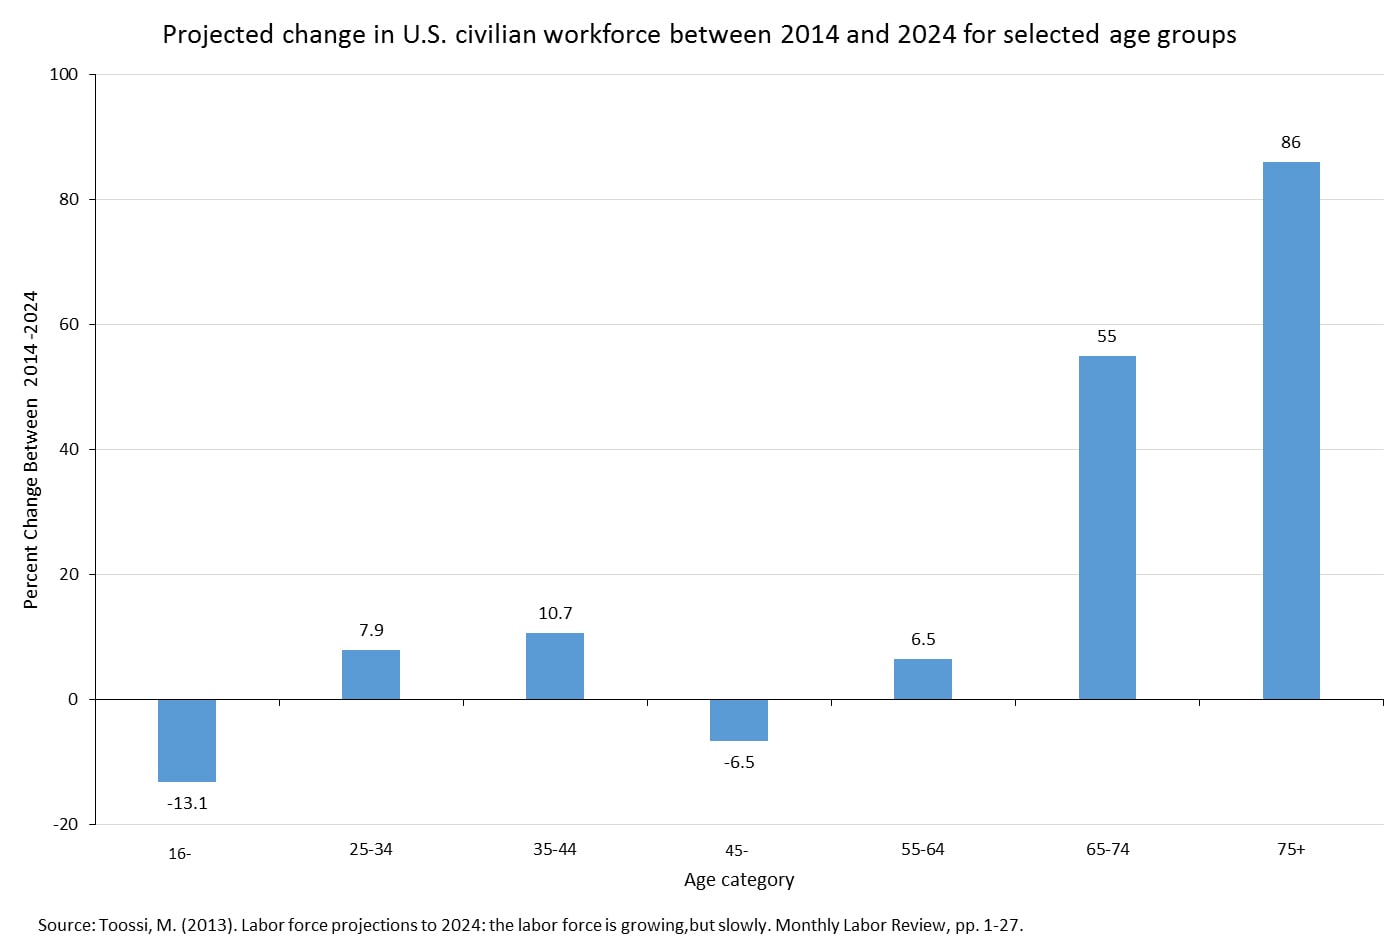 Projected change in U.S. civilian workforce between 2012 and 2022 for age groups ranging from 16 to 75 years of age.